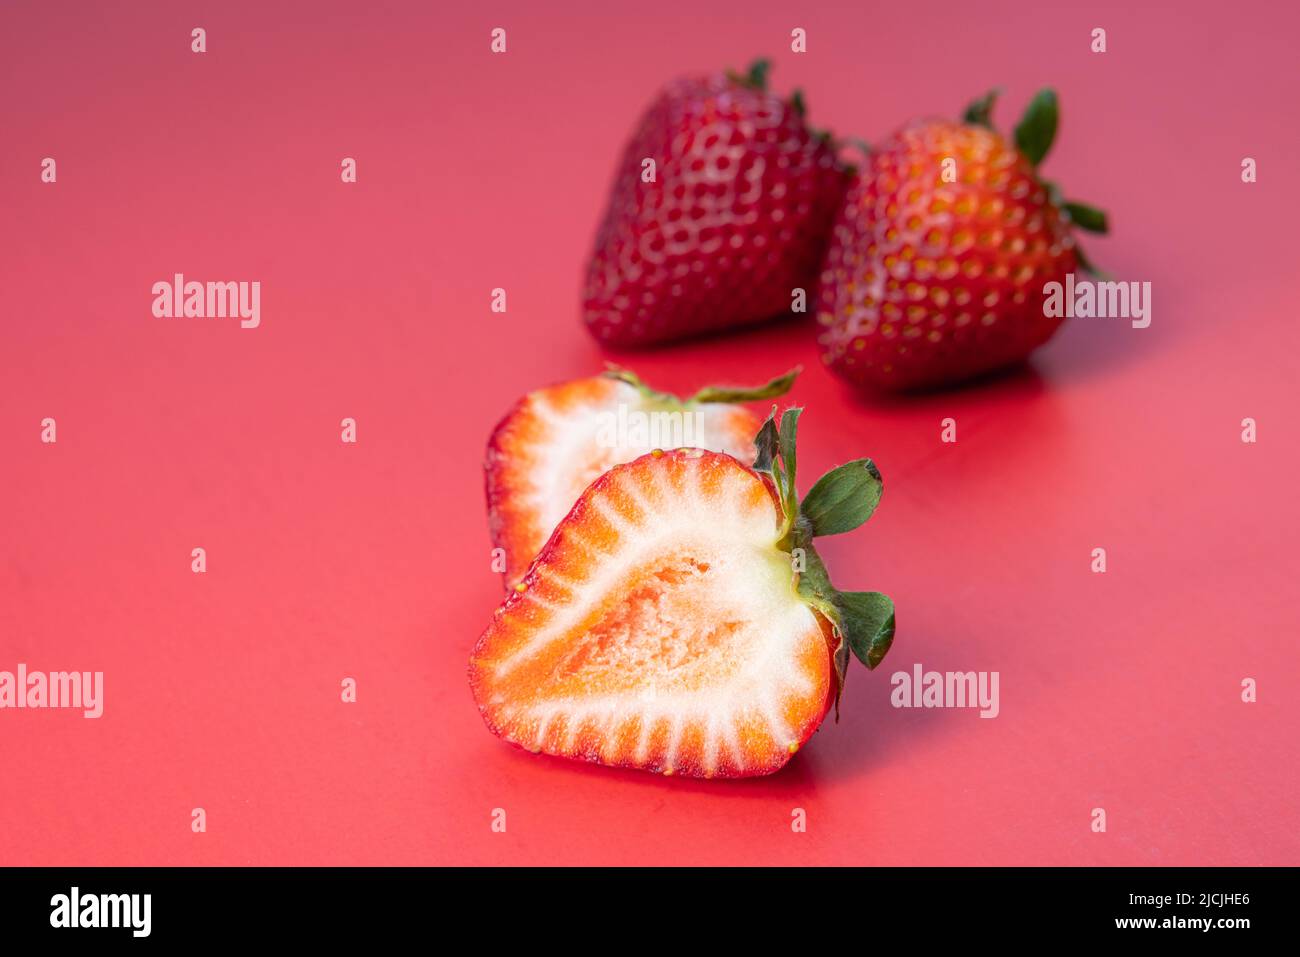 Fresh ripe juicy strwaberries isolated on a red background Stock Photo